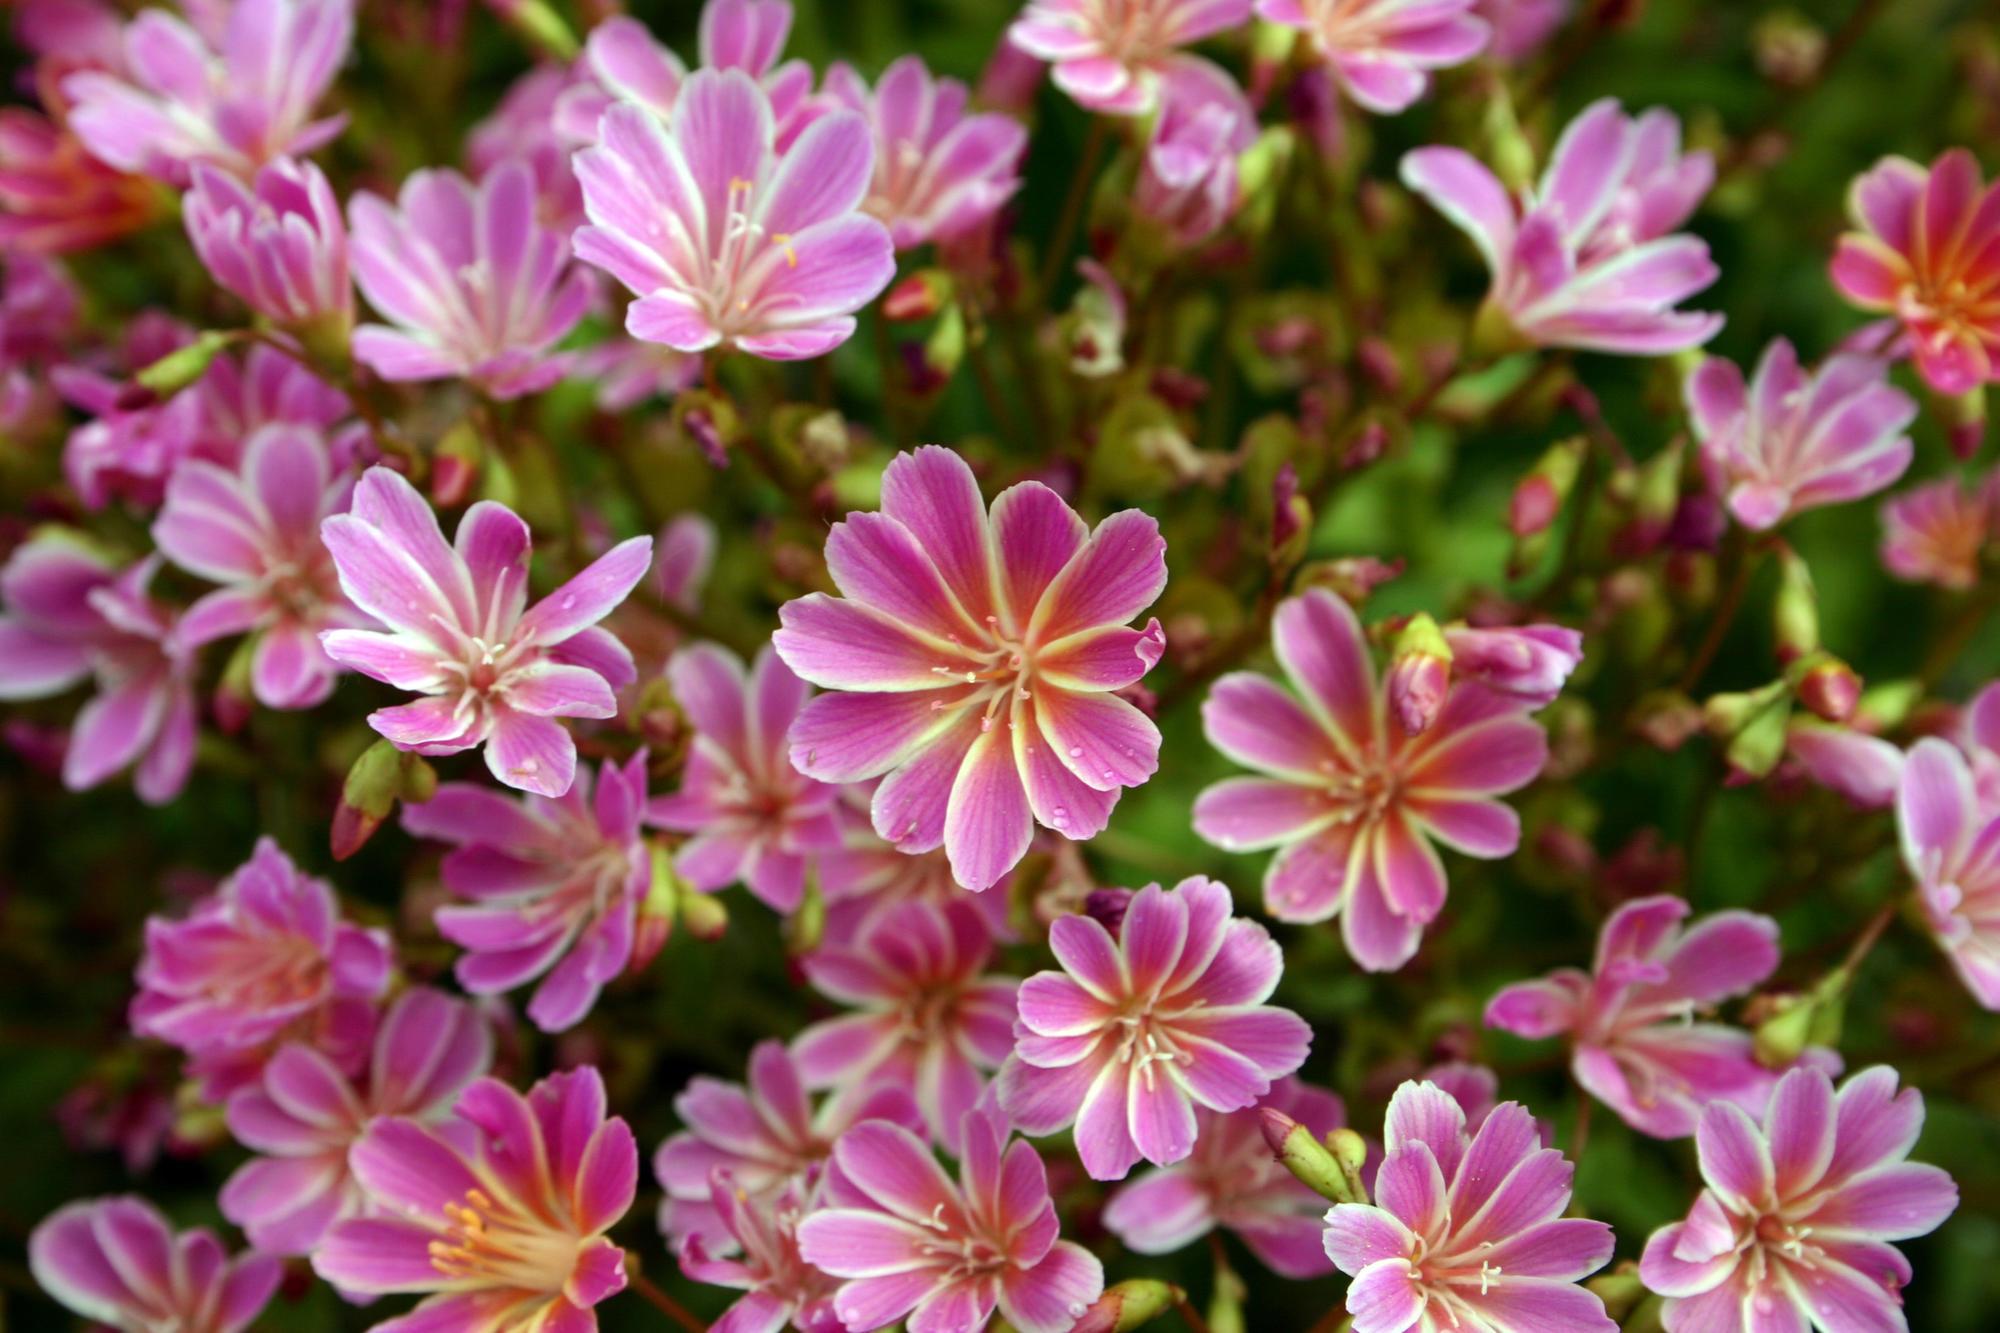 Pink flowers, petals edged in white, with yellow centers